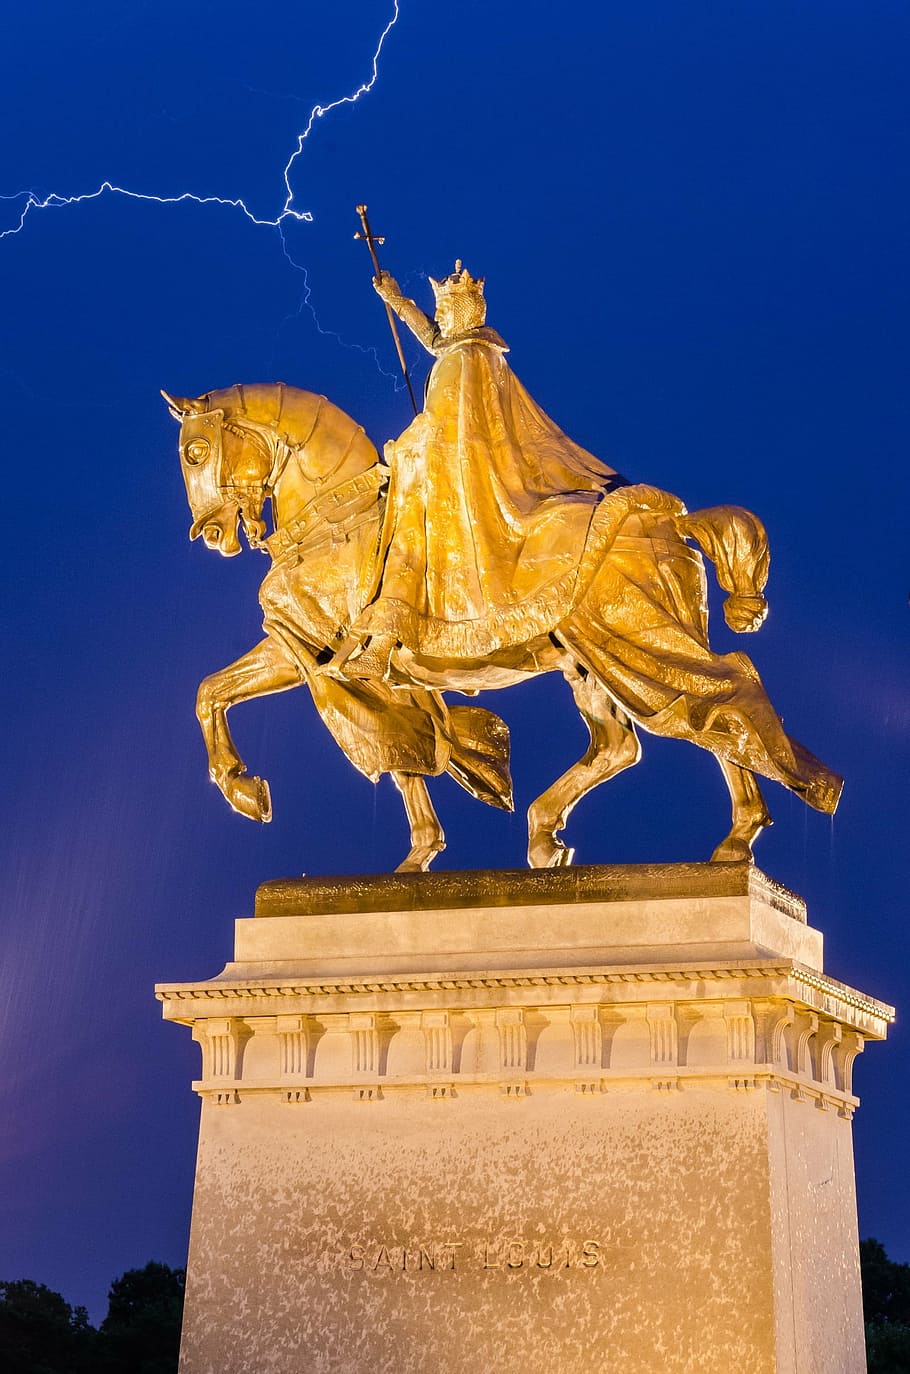 man, riding, horse statue, statue, french king louis ix, france, lightning, storm, sky, electricity